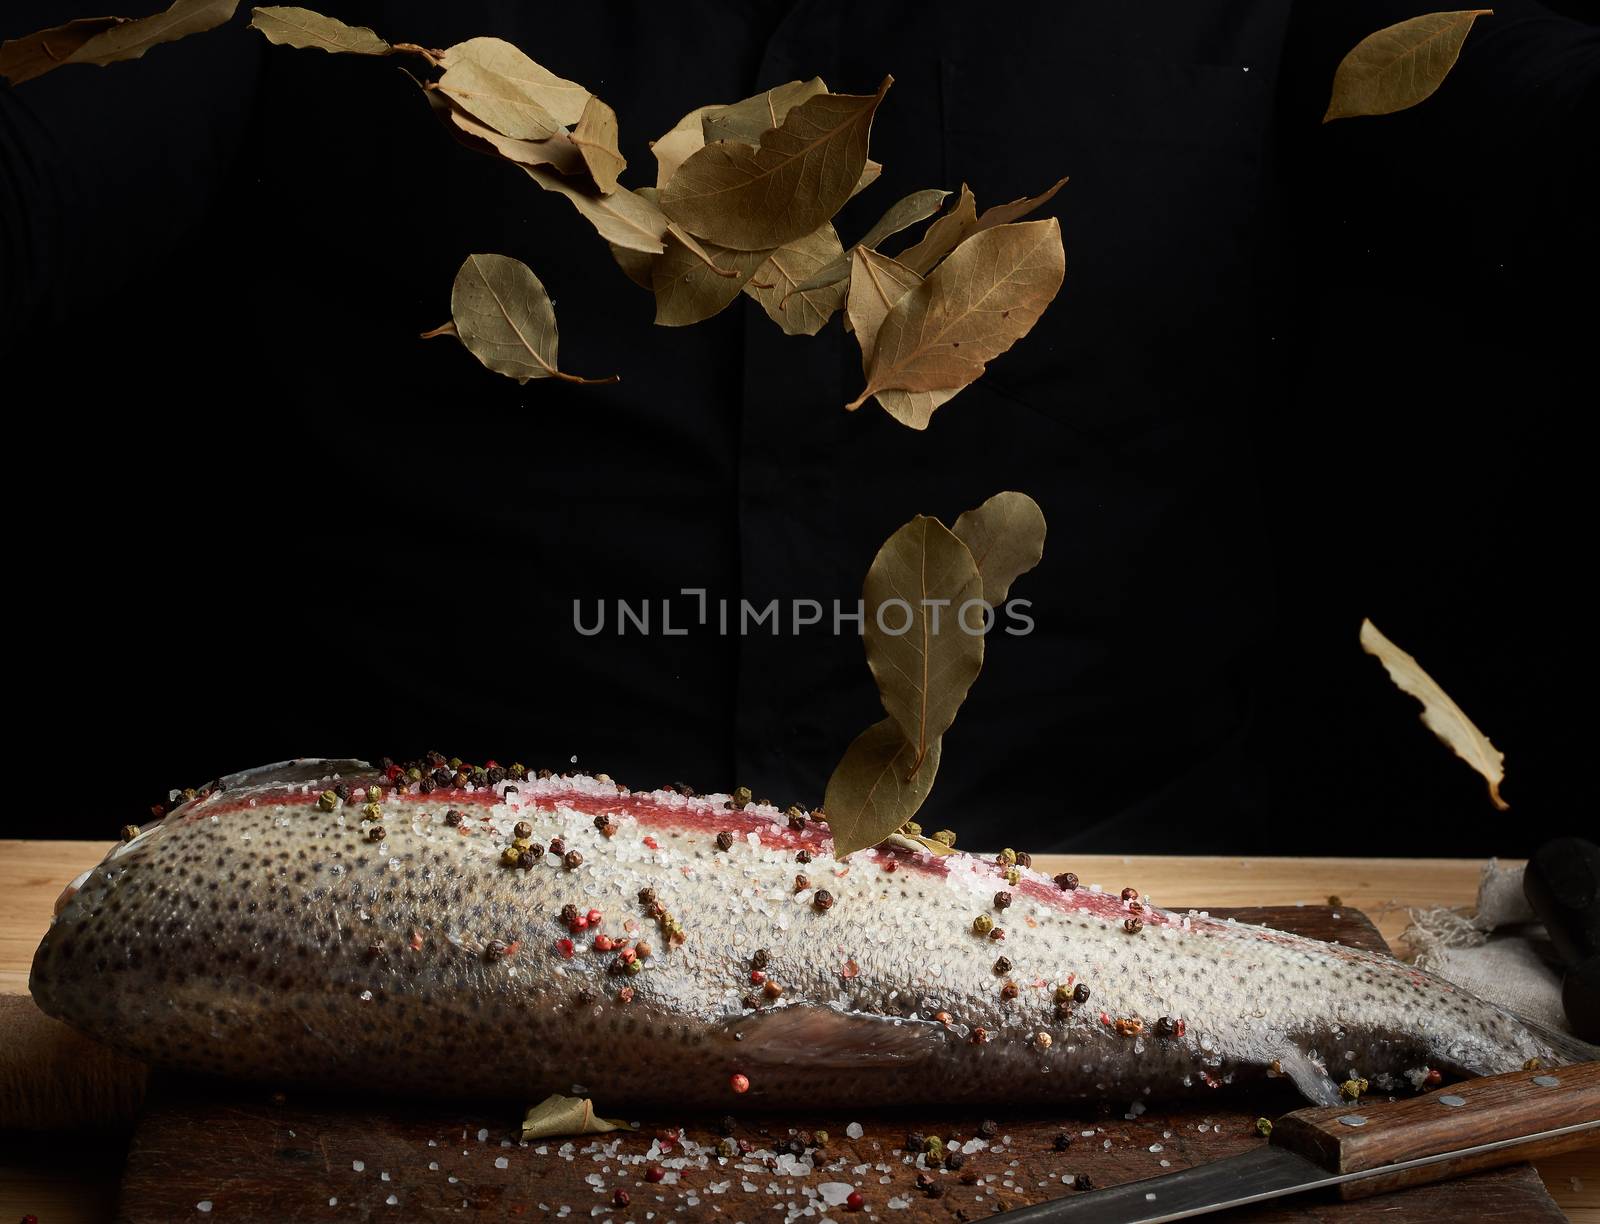 headless salmon filet on a wooden board sprinkled with leaves of by ndanko